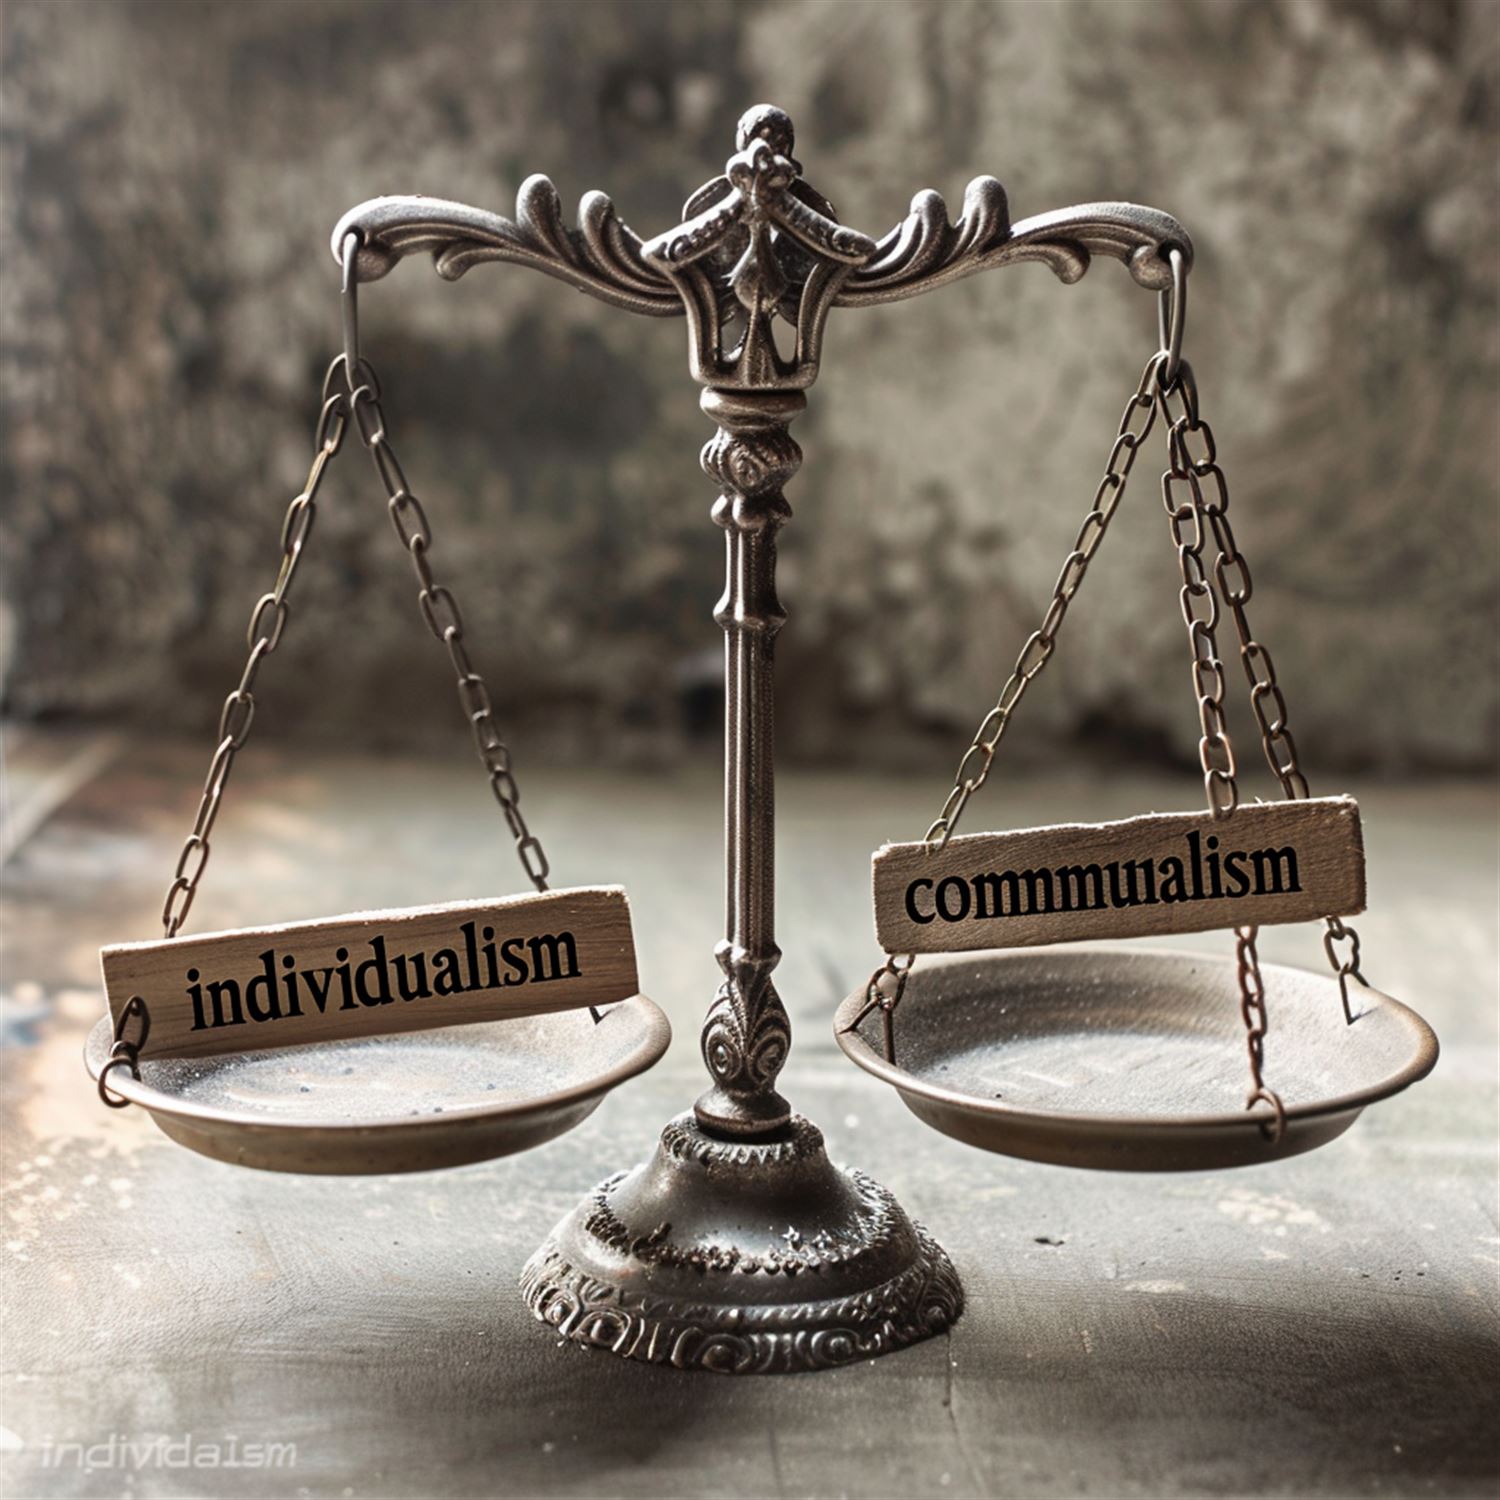 Communalism/Individualism: Where’s the Middle Ground?